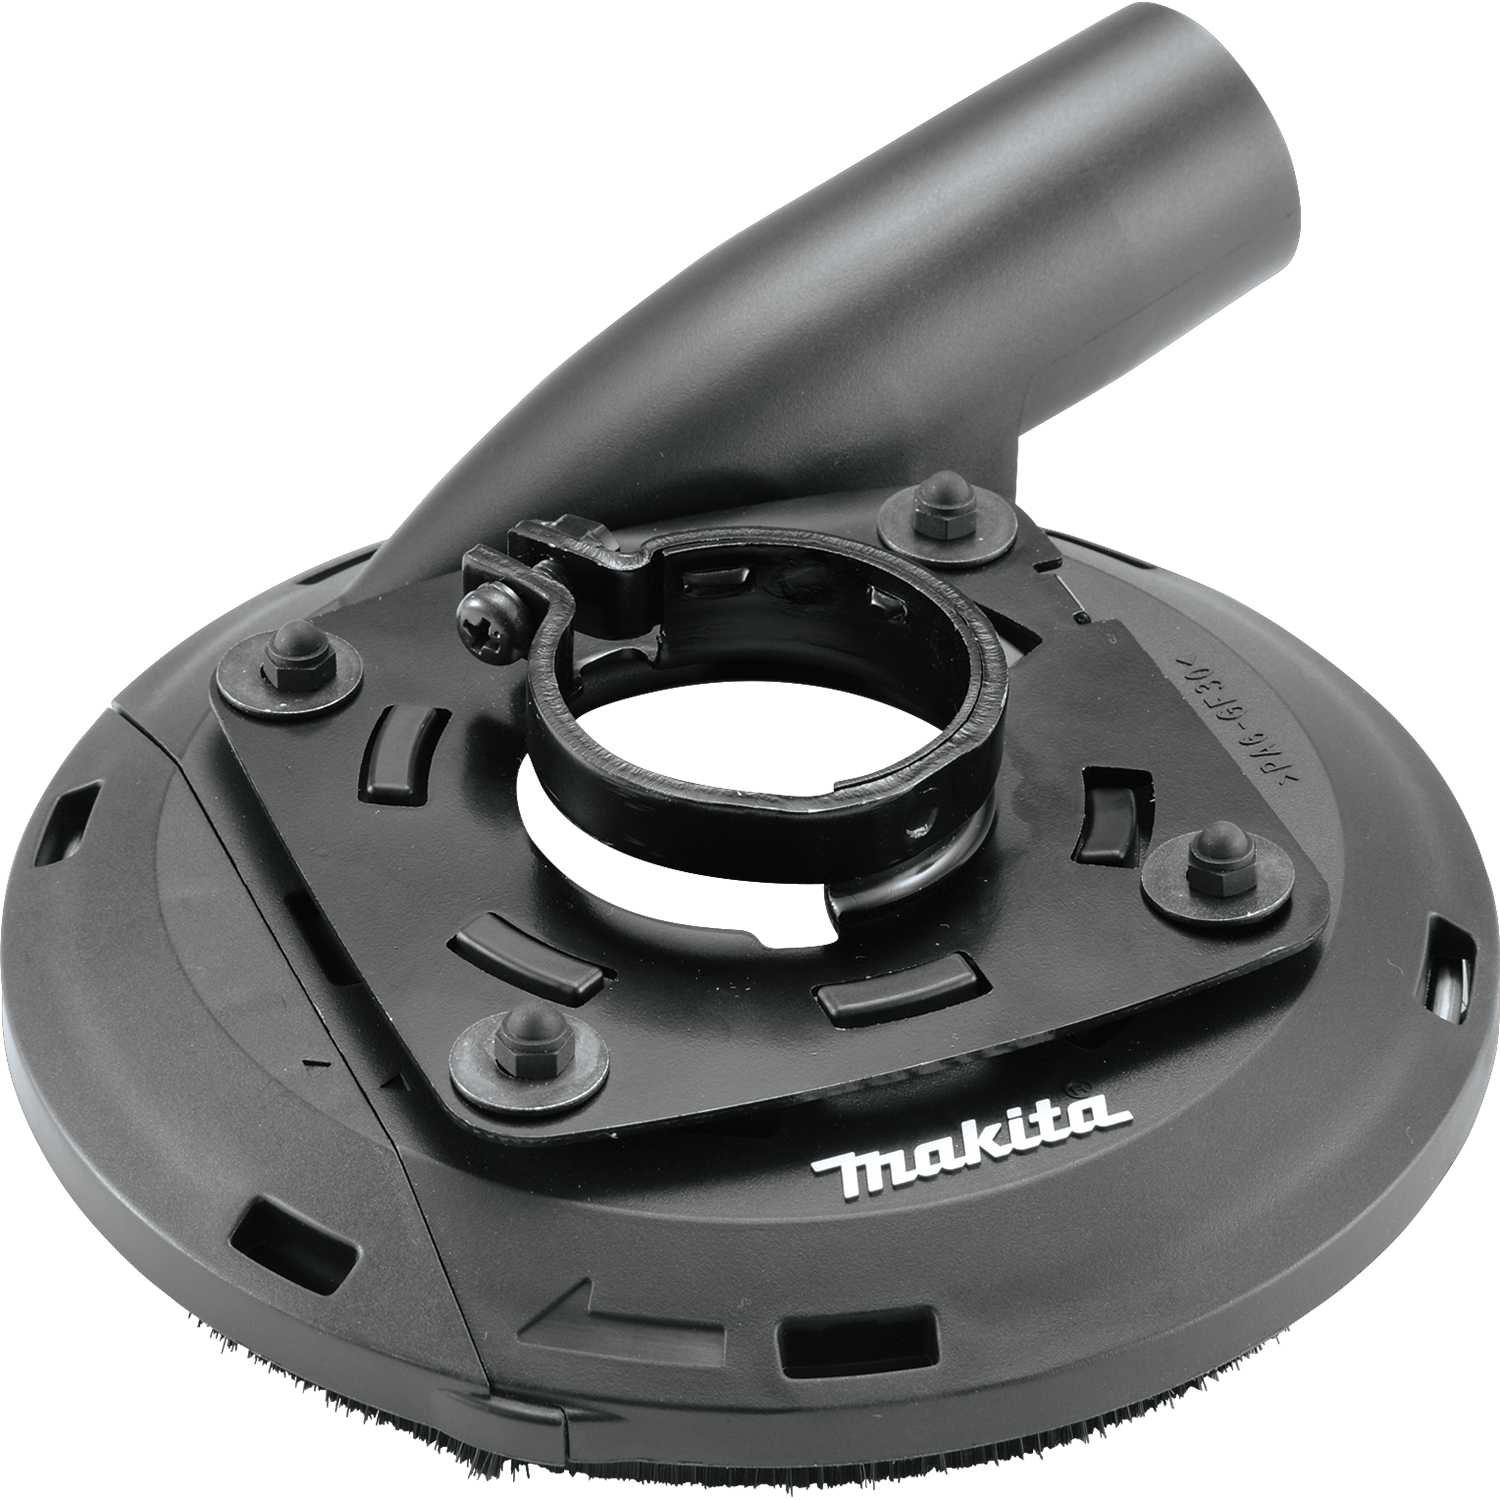 Makita 4‑1/2-5in Dust Extraction Surface Grinding Shroud - Utility and Pocket Knives